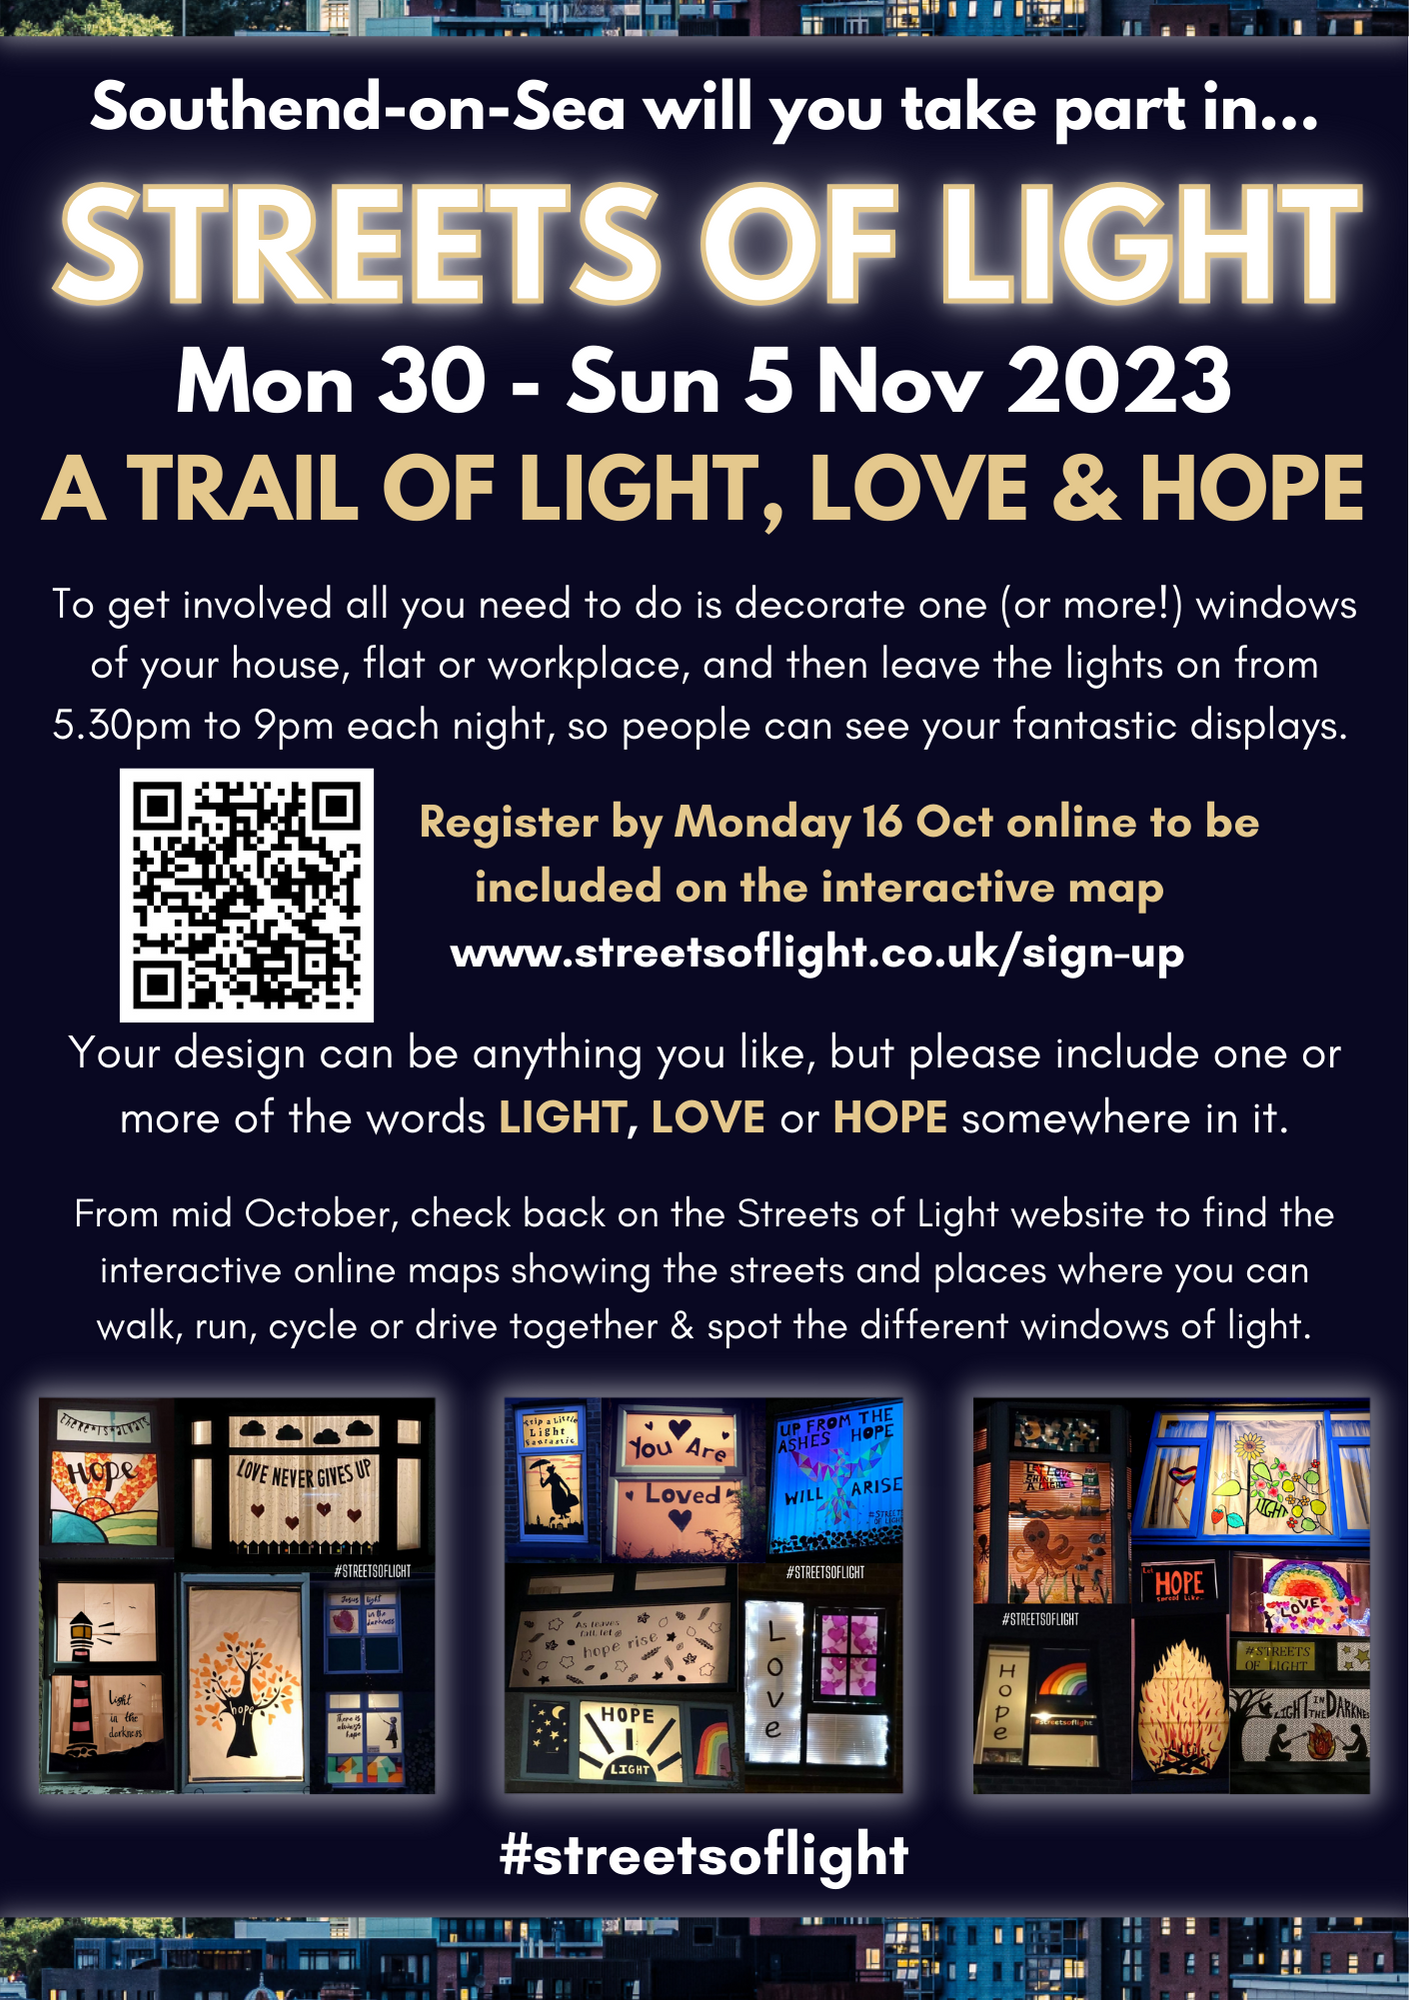 Southend Streets Of Light: A Trail of Light, Love & Hope